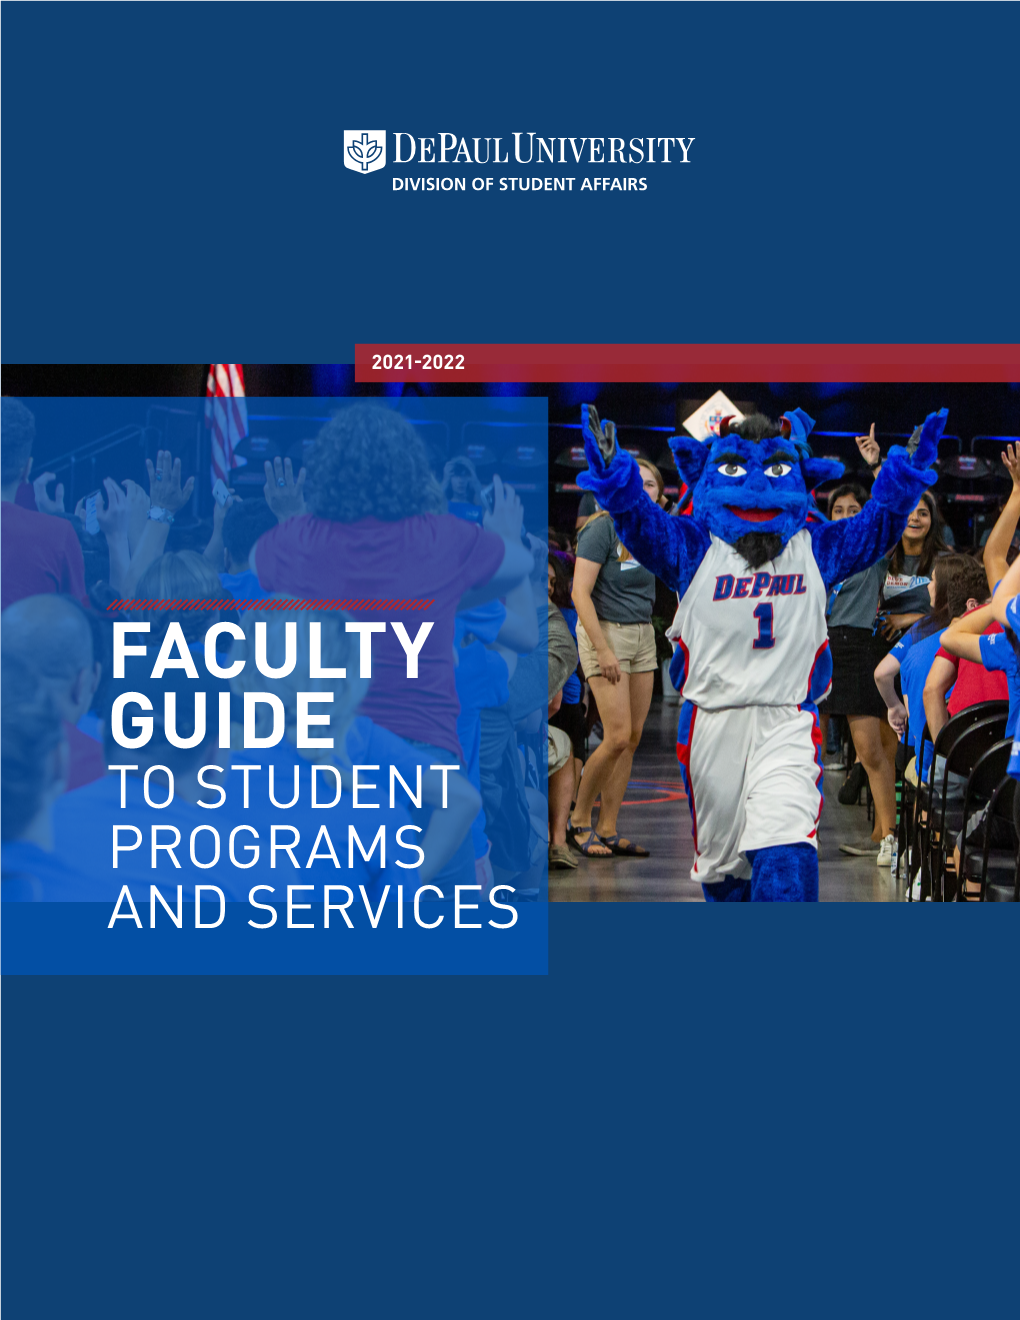 Faculty Guide to Student Affairs